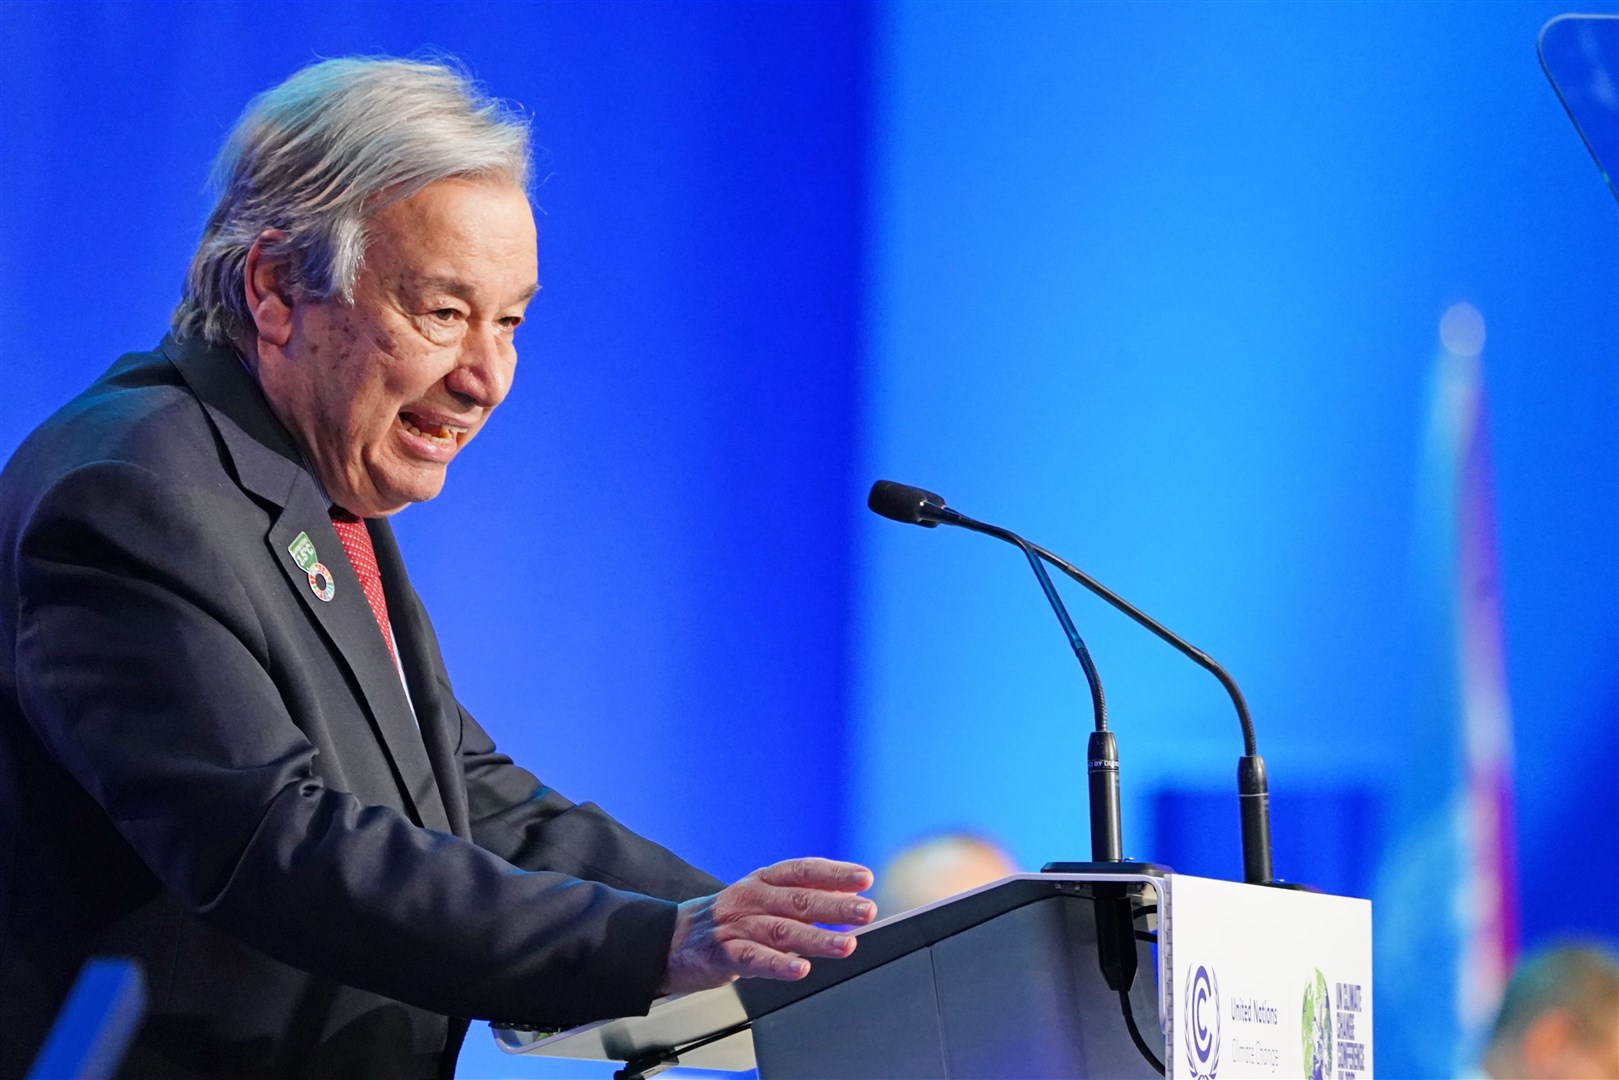 UN Secretary-General Antonio Guterres has warned that climate chaos will continue wrecking lives if the talks are not successful (Jane Barlow/PA)